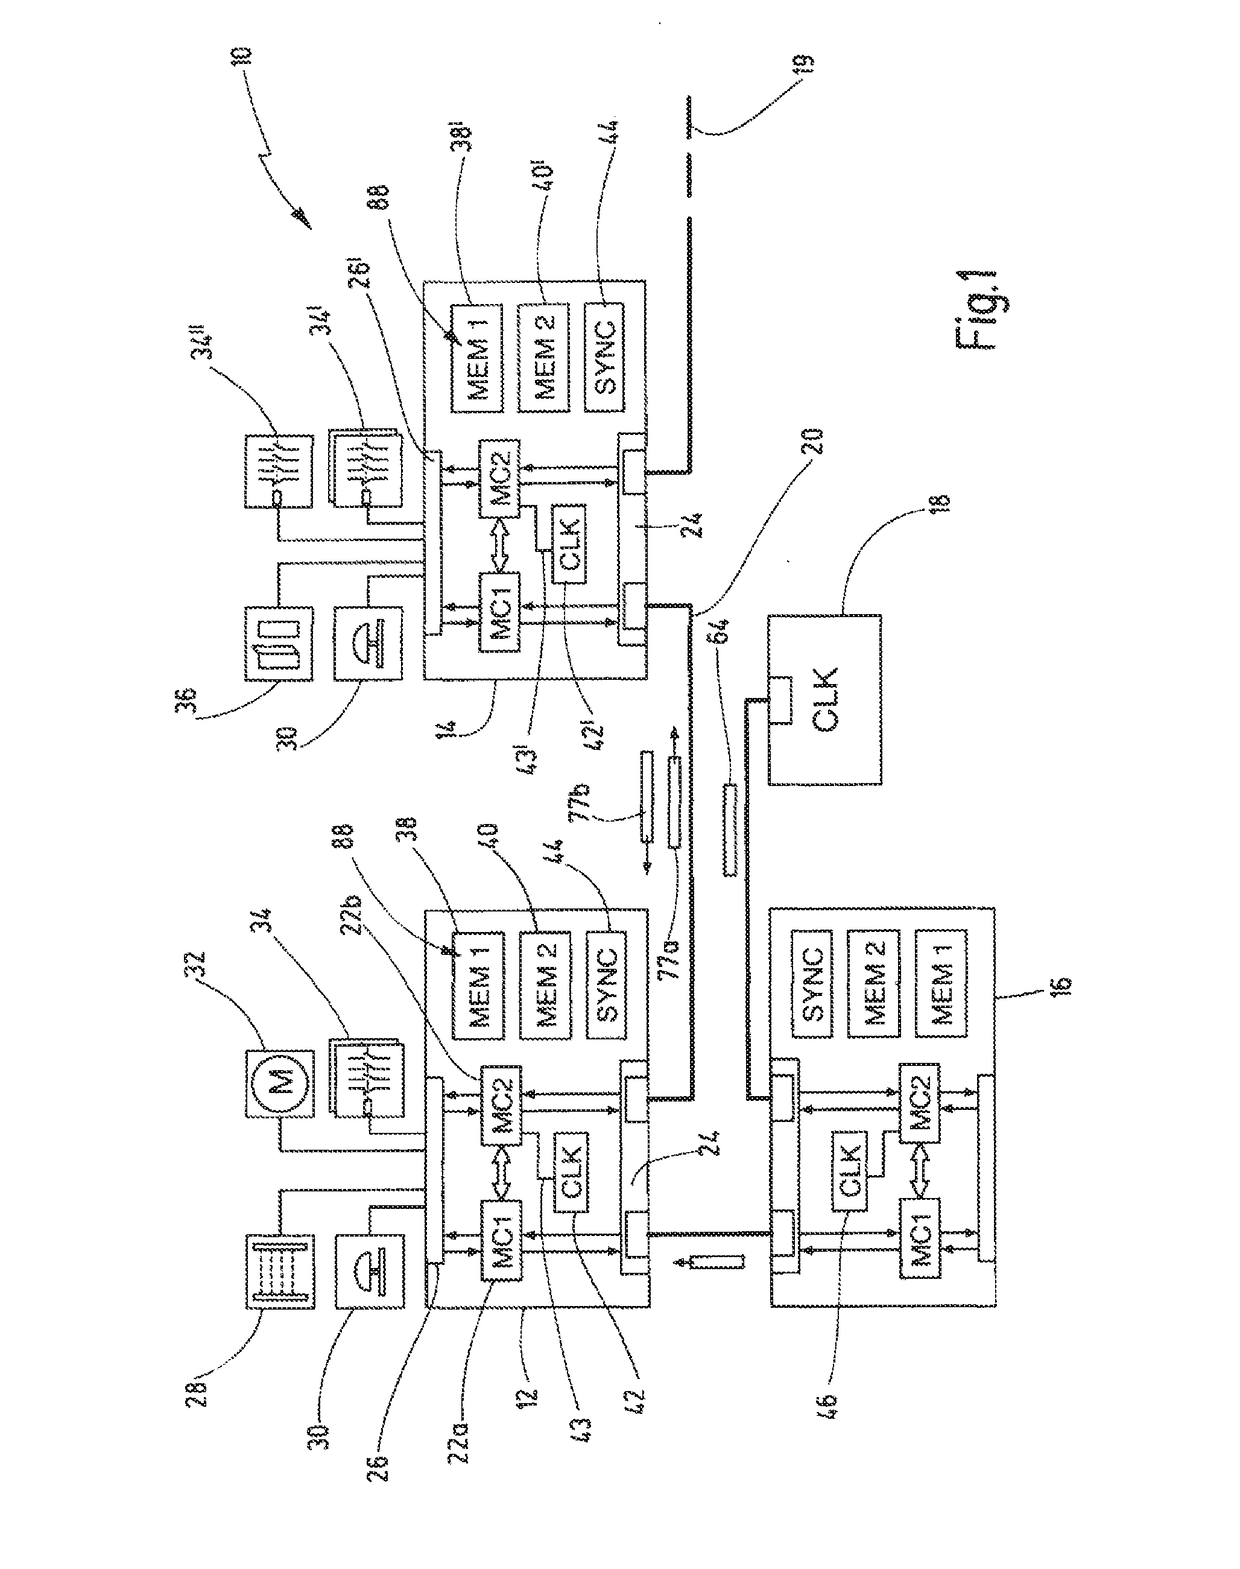 Apparatus and method for controlling an automated installation